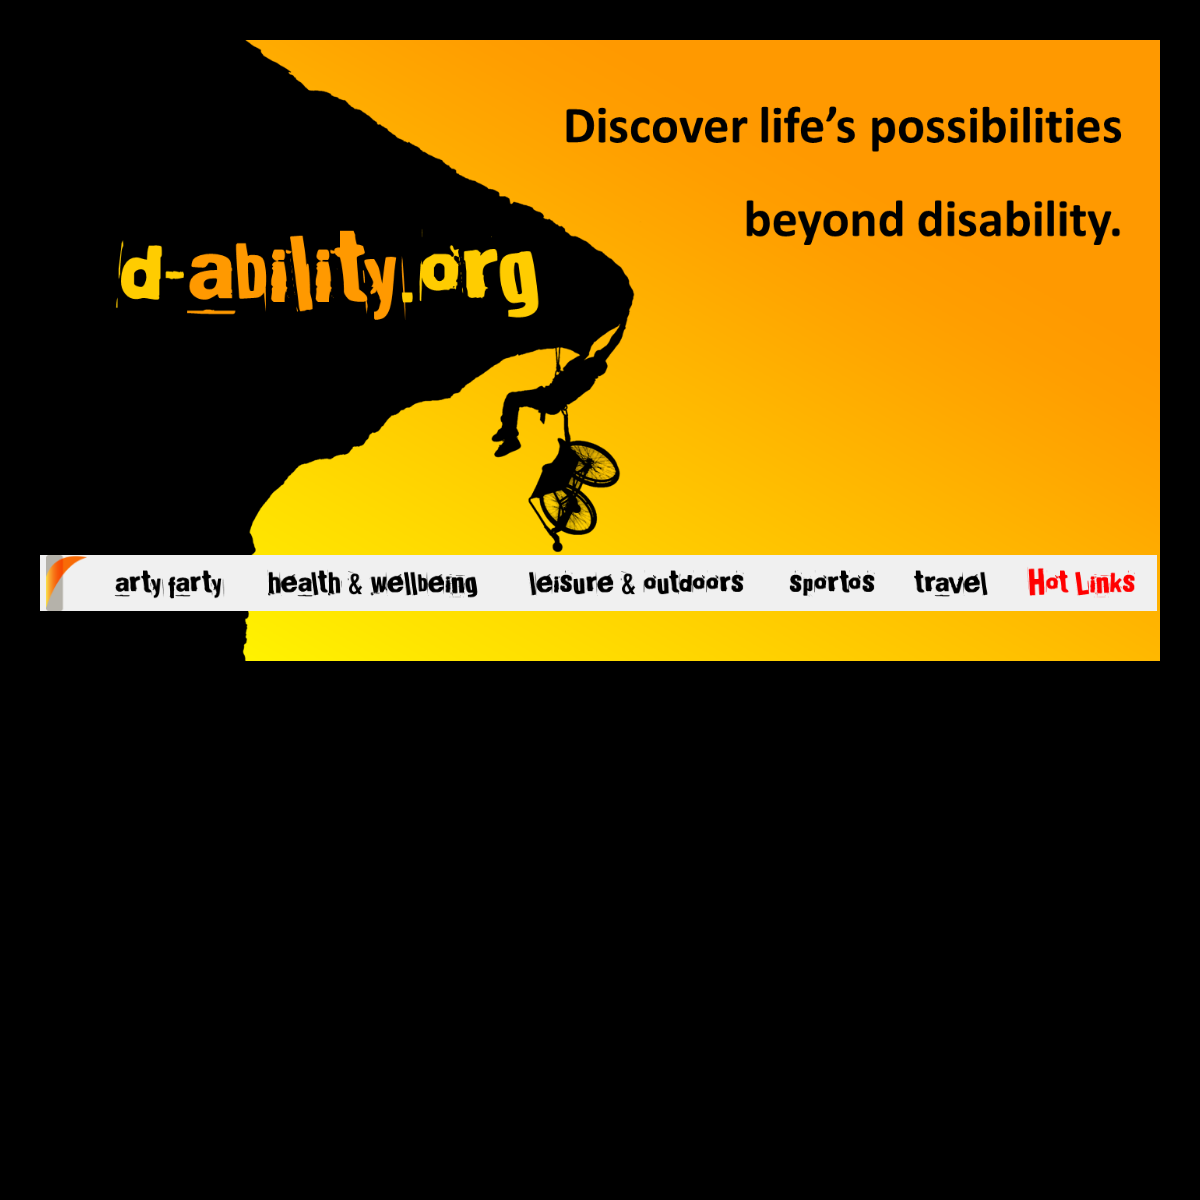 A complete backup of d-ability.org